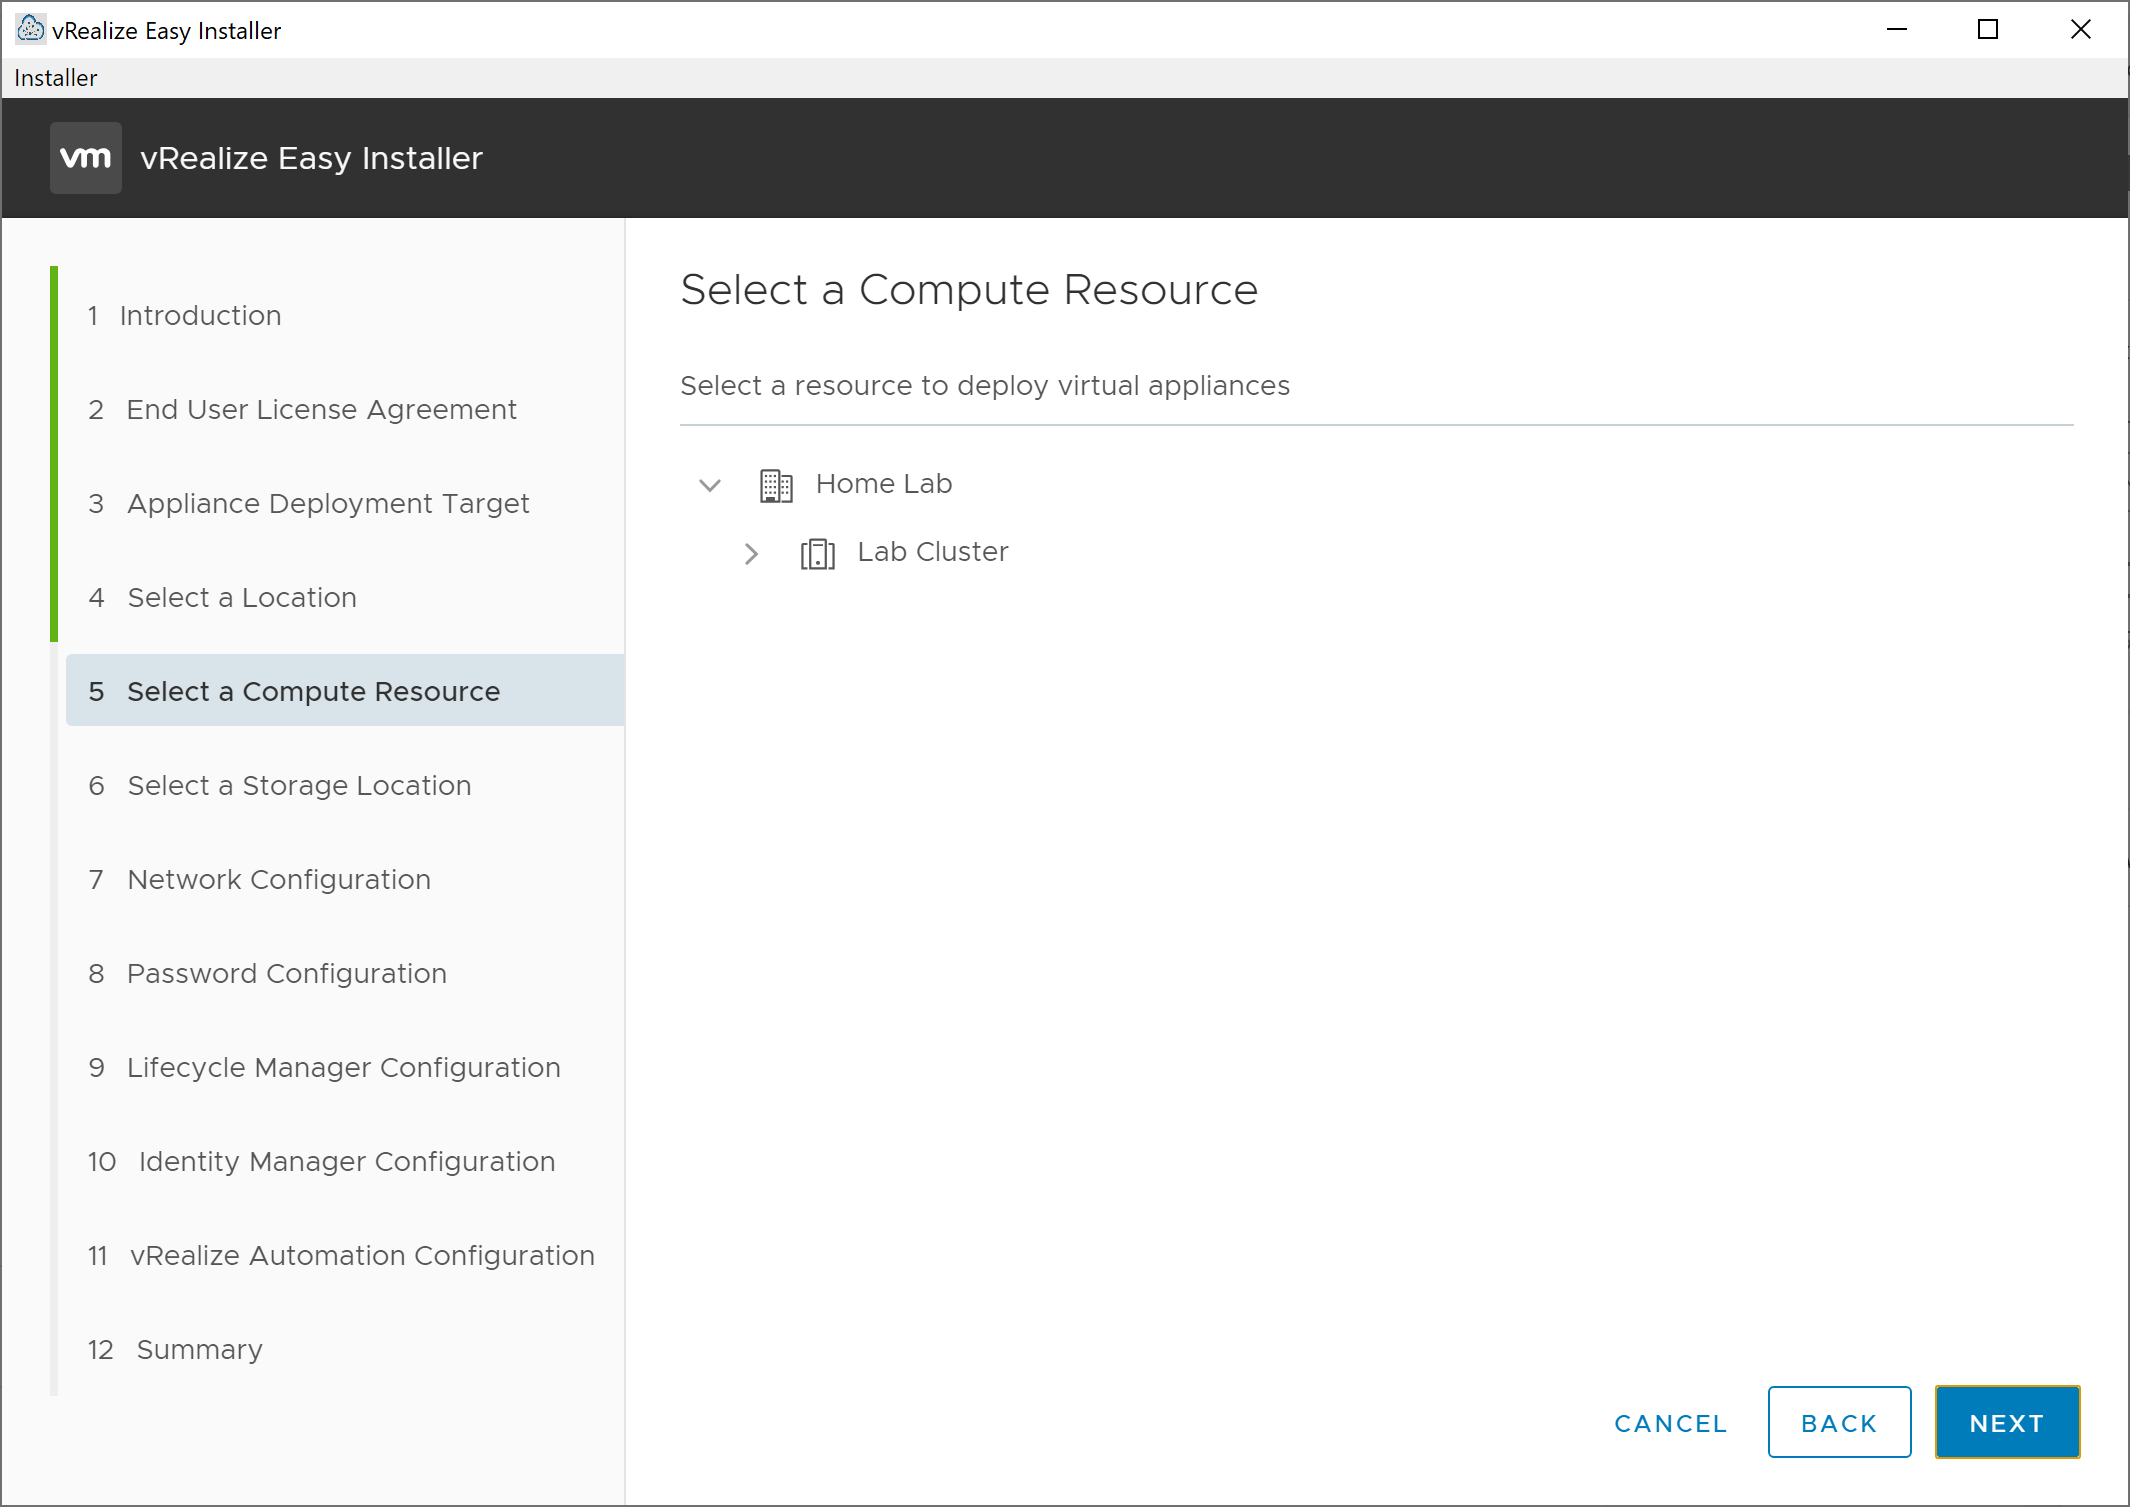 vRealize Easy Installer - New Install - Select a Compute Resource